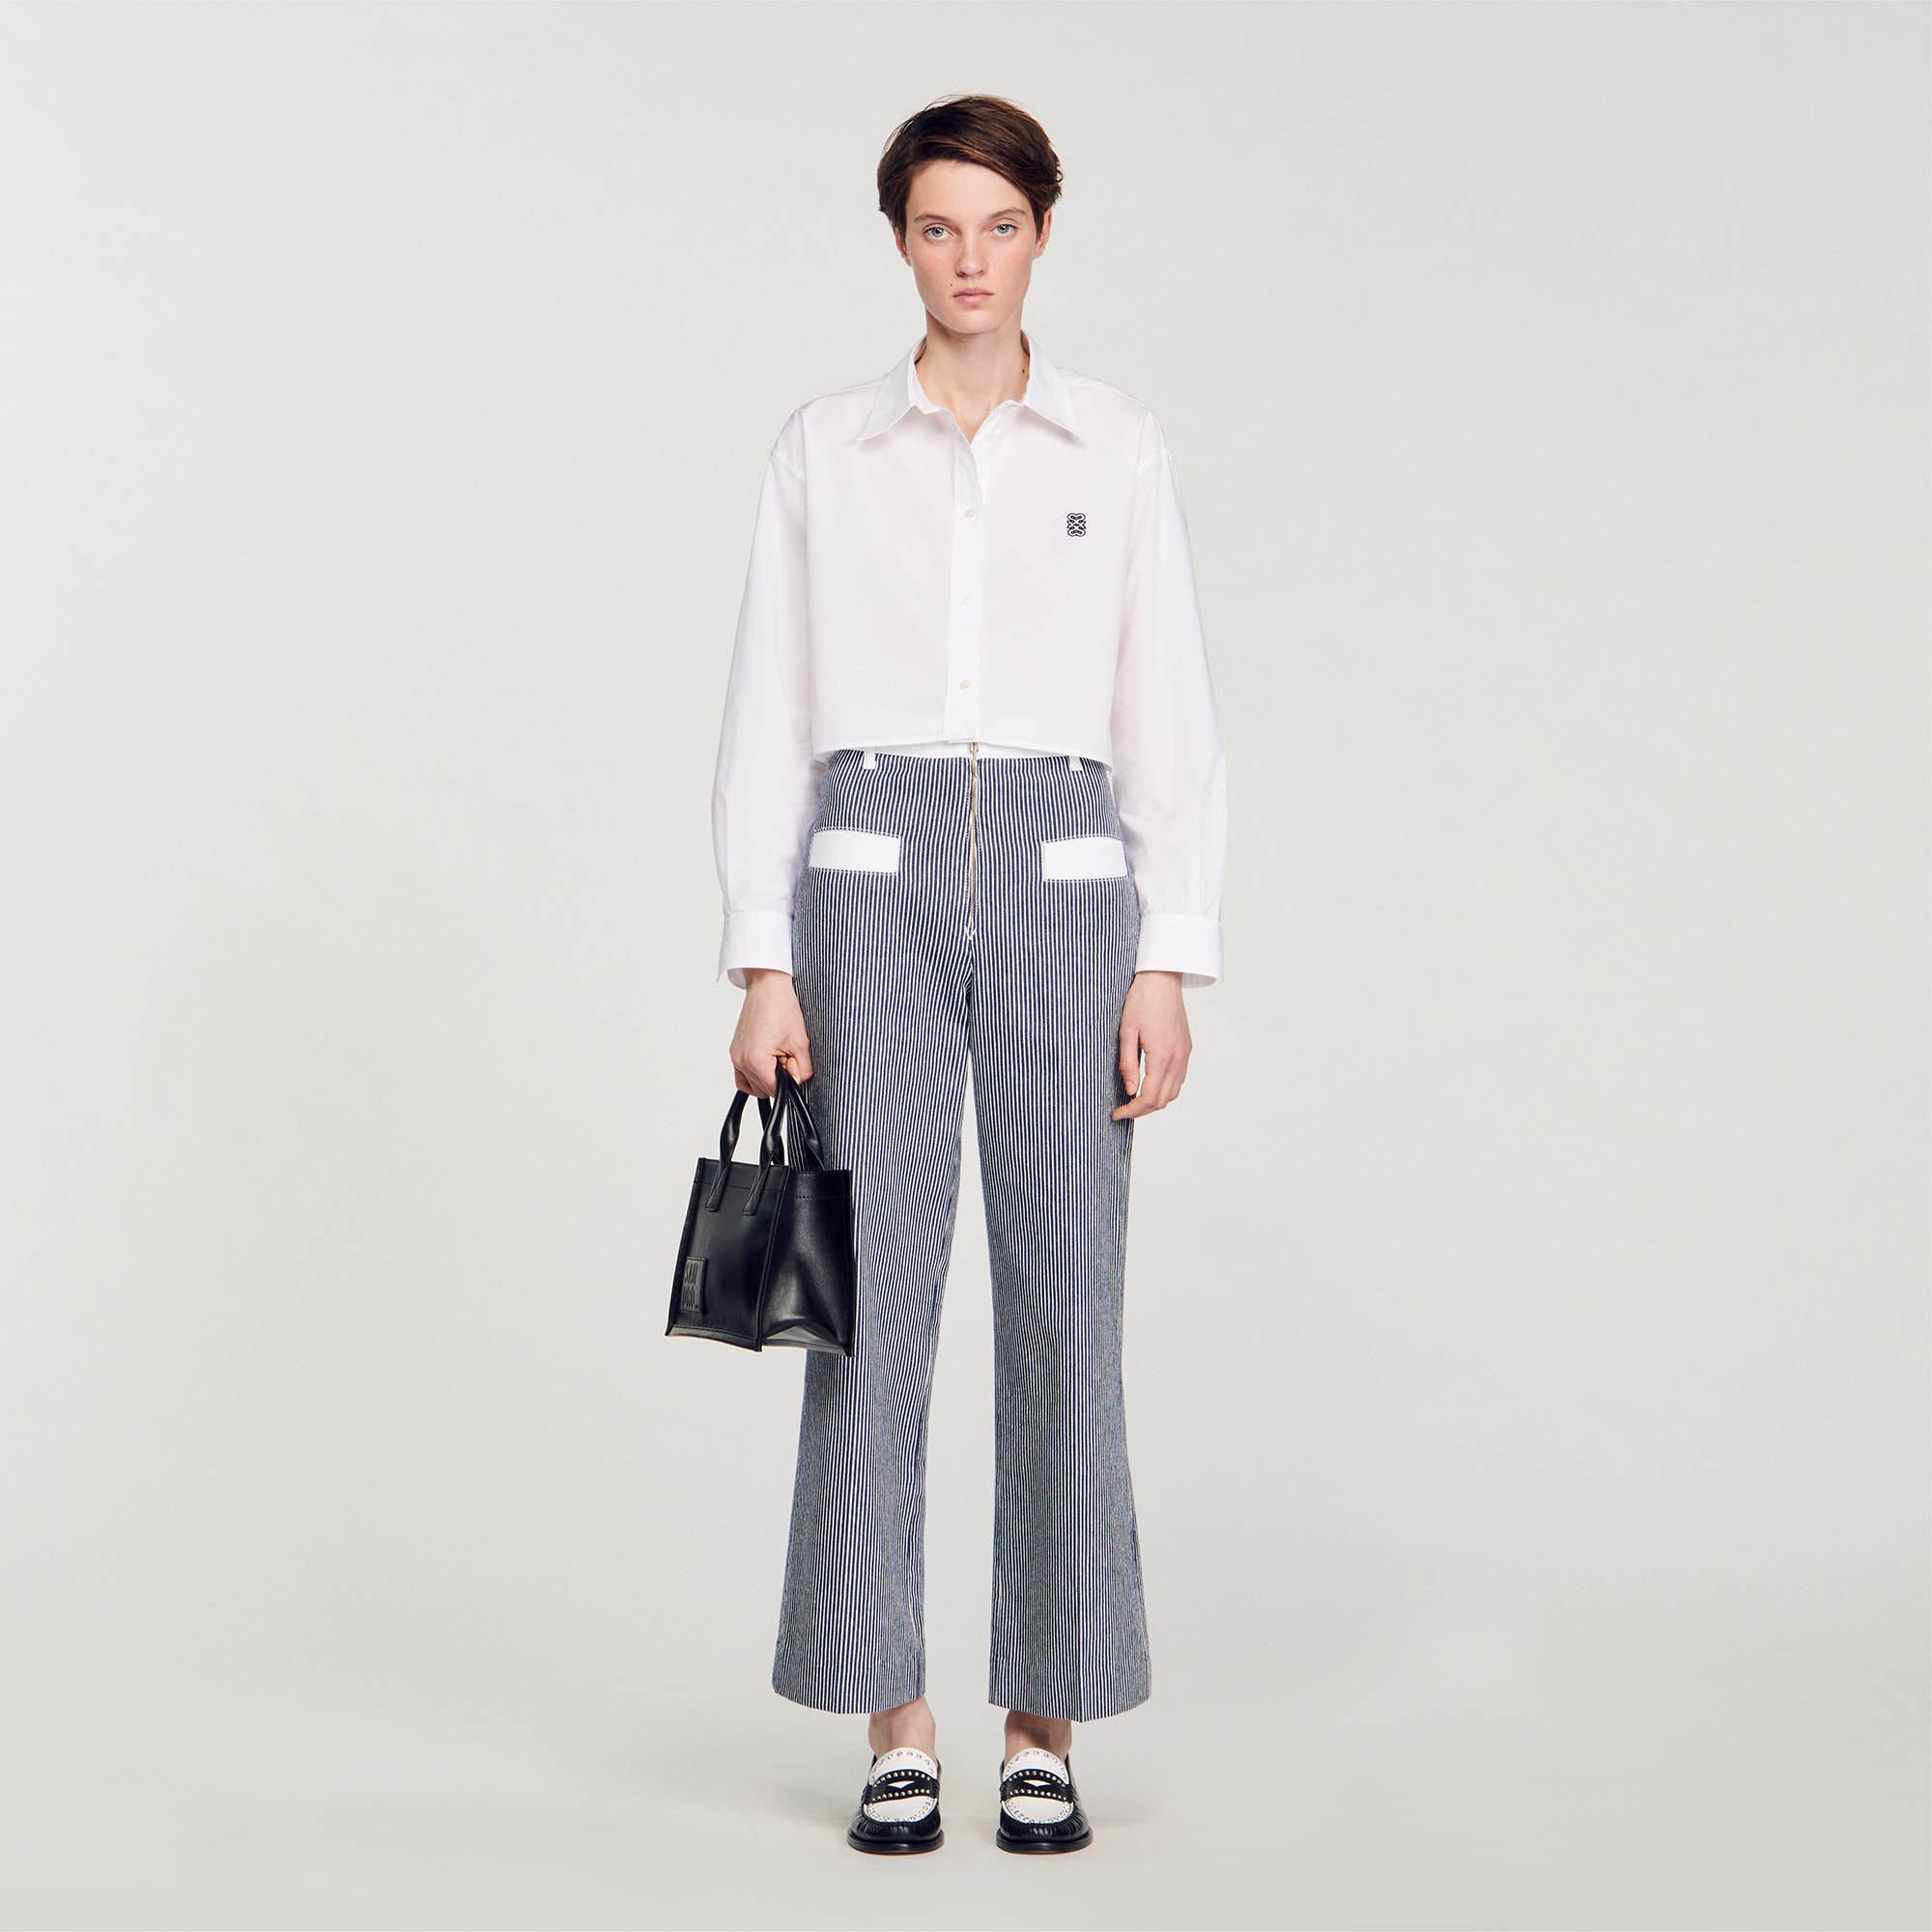 Sandro cotton Lining: The cotton in this item was produced organically via a cultivation method that preserves biodiversity and bans the use of pesticides and GMOs